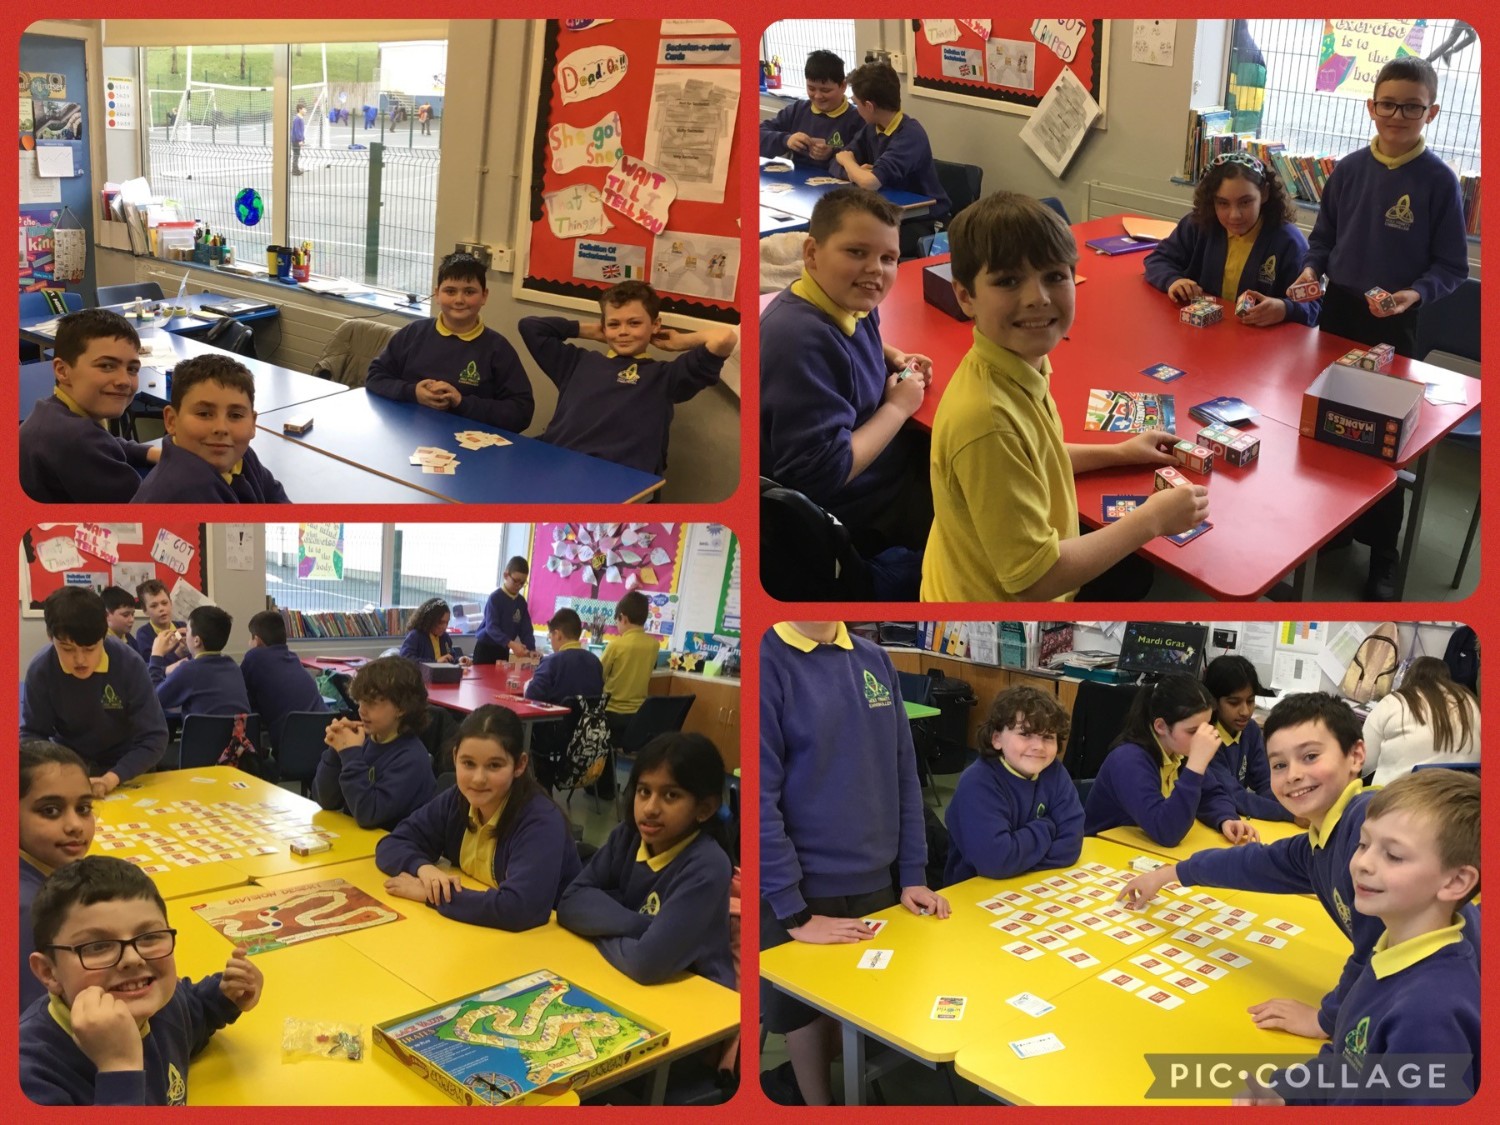 Mrs Cathcart's class enjoyed playing card games and board games as part of their math's work.